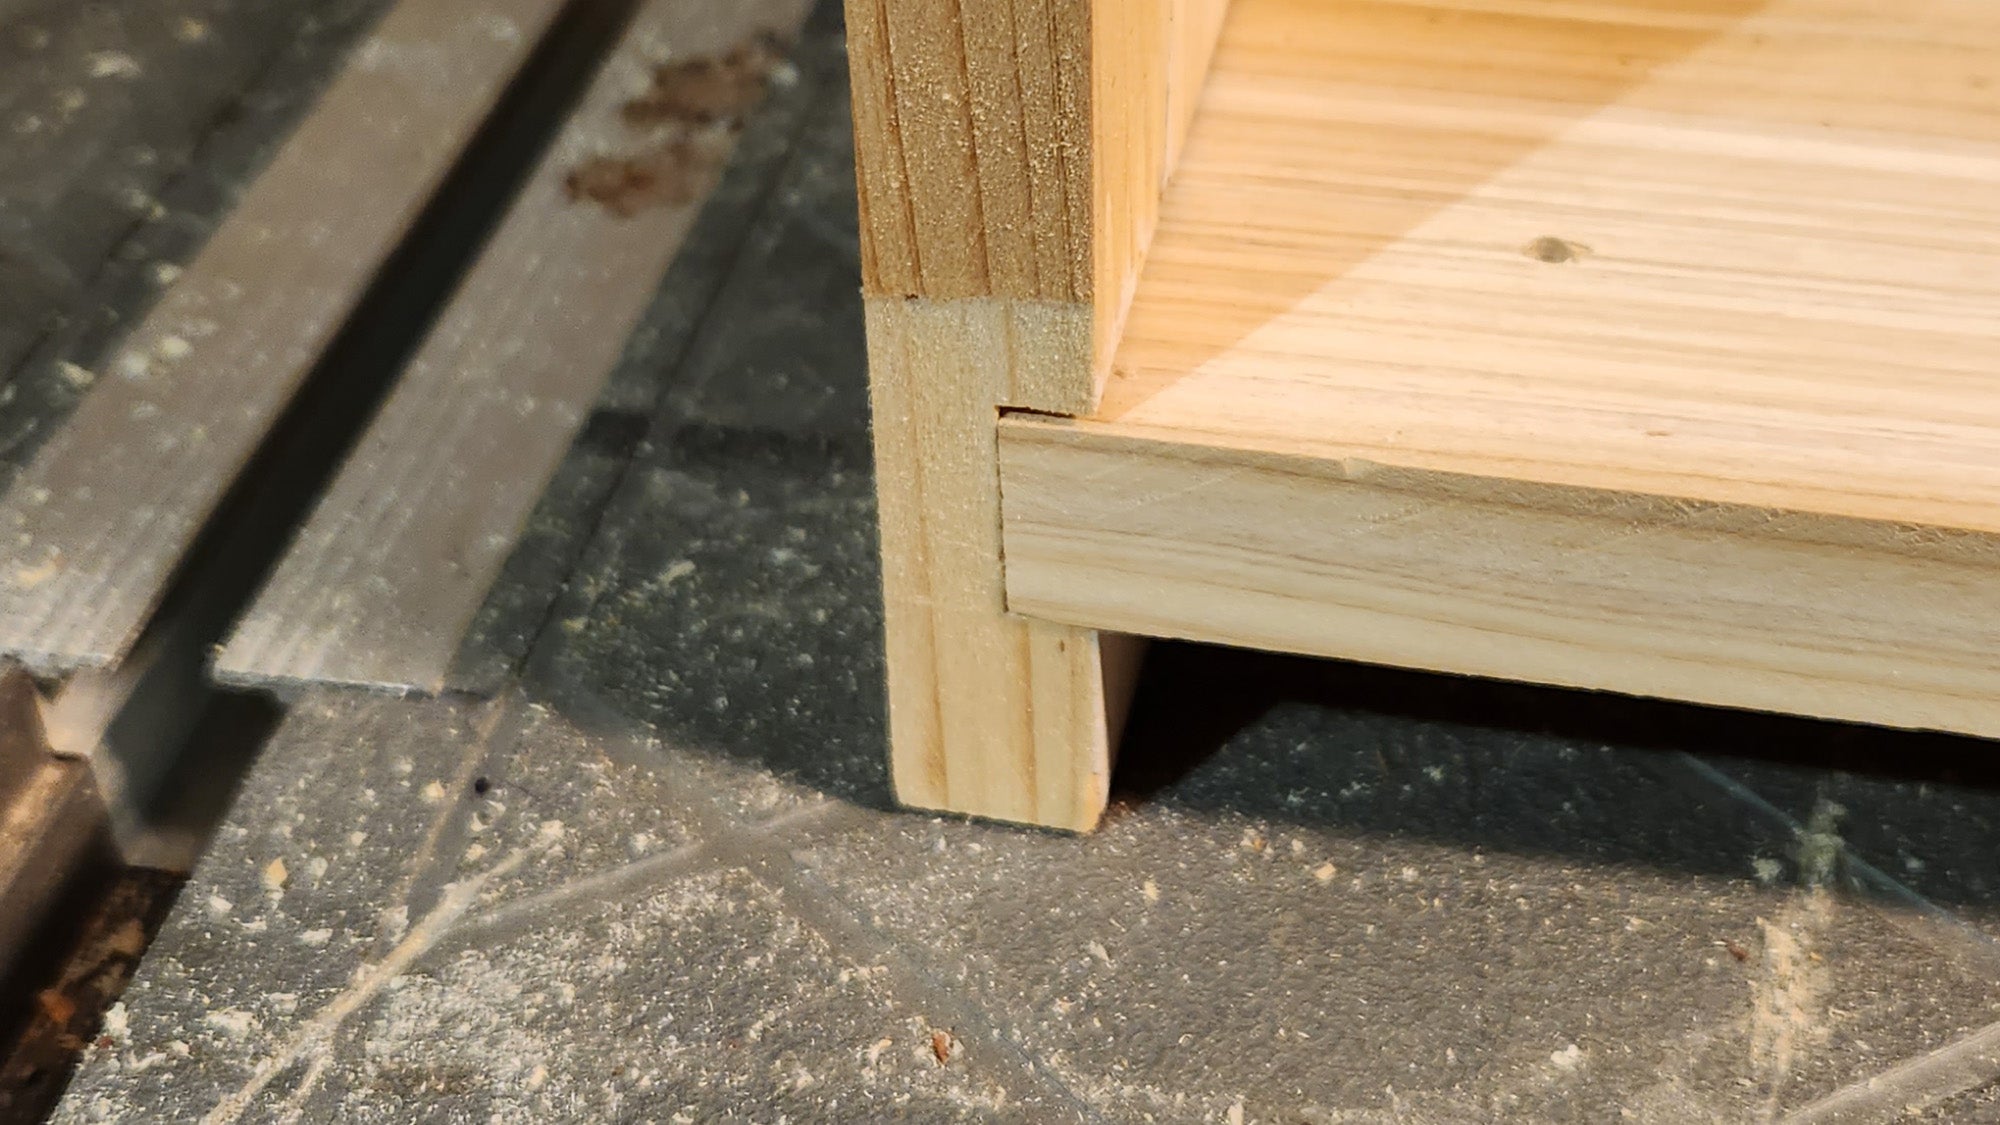 Learning how to use dados to join wood will render strong, durable joints. 